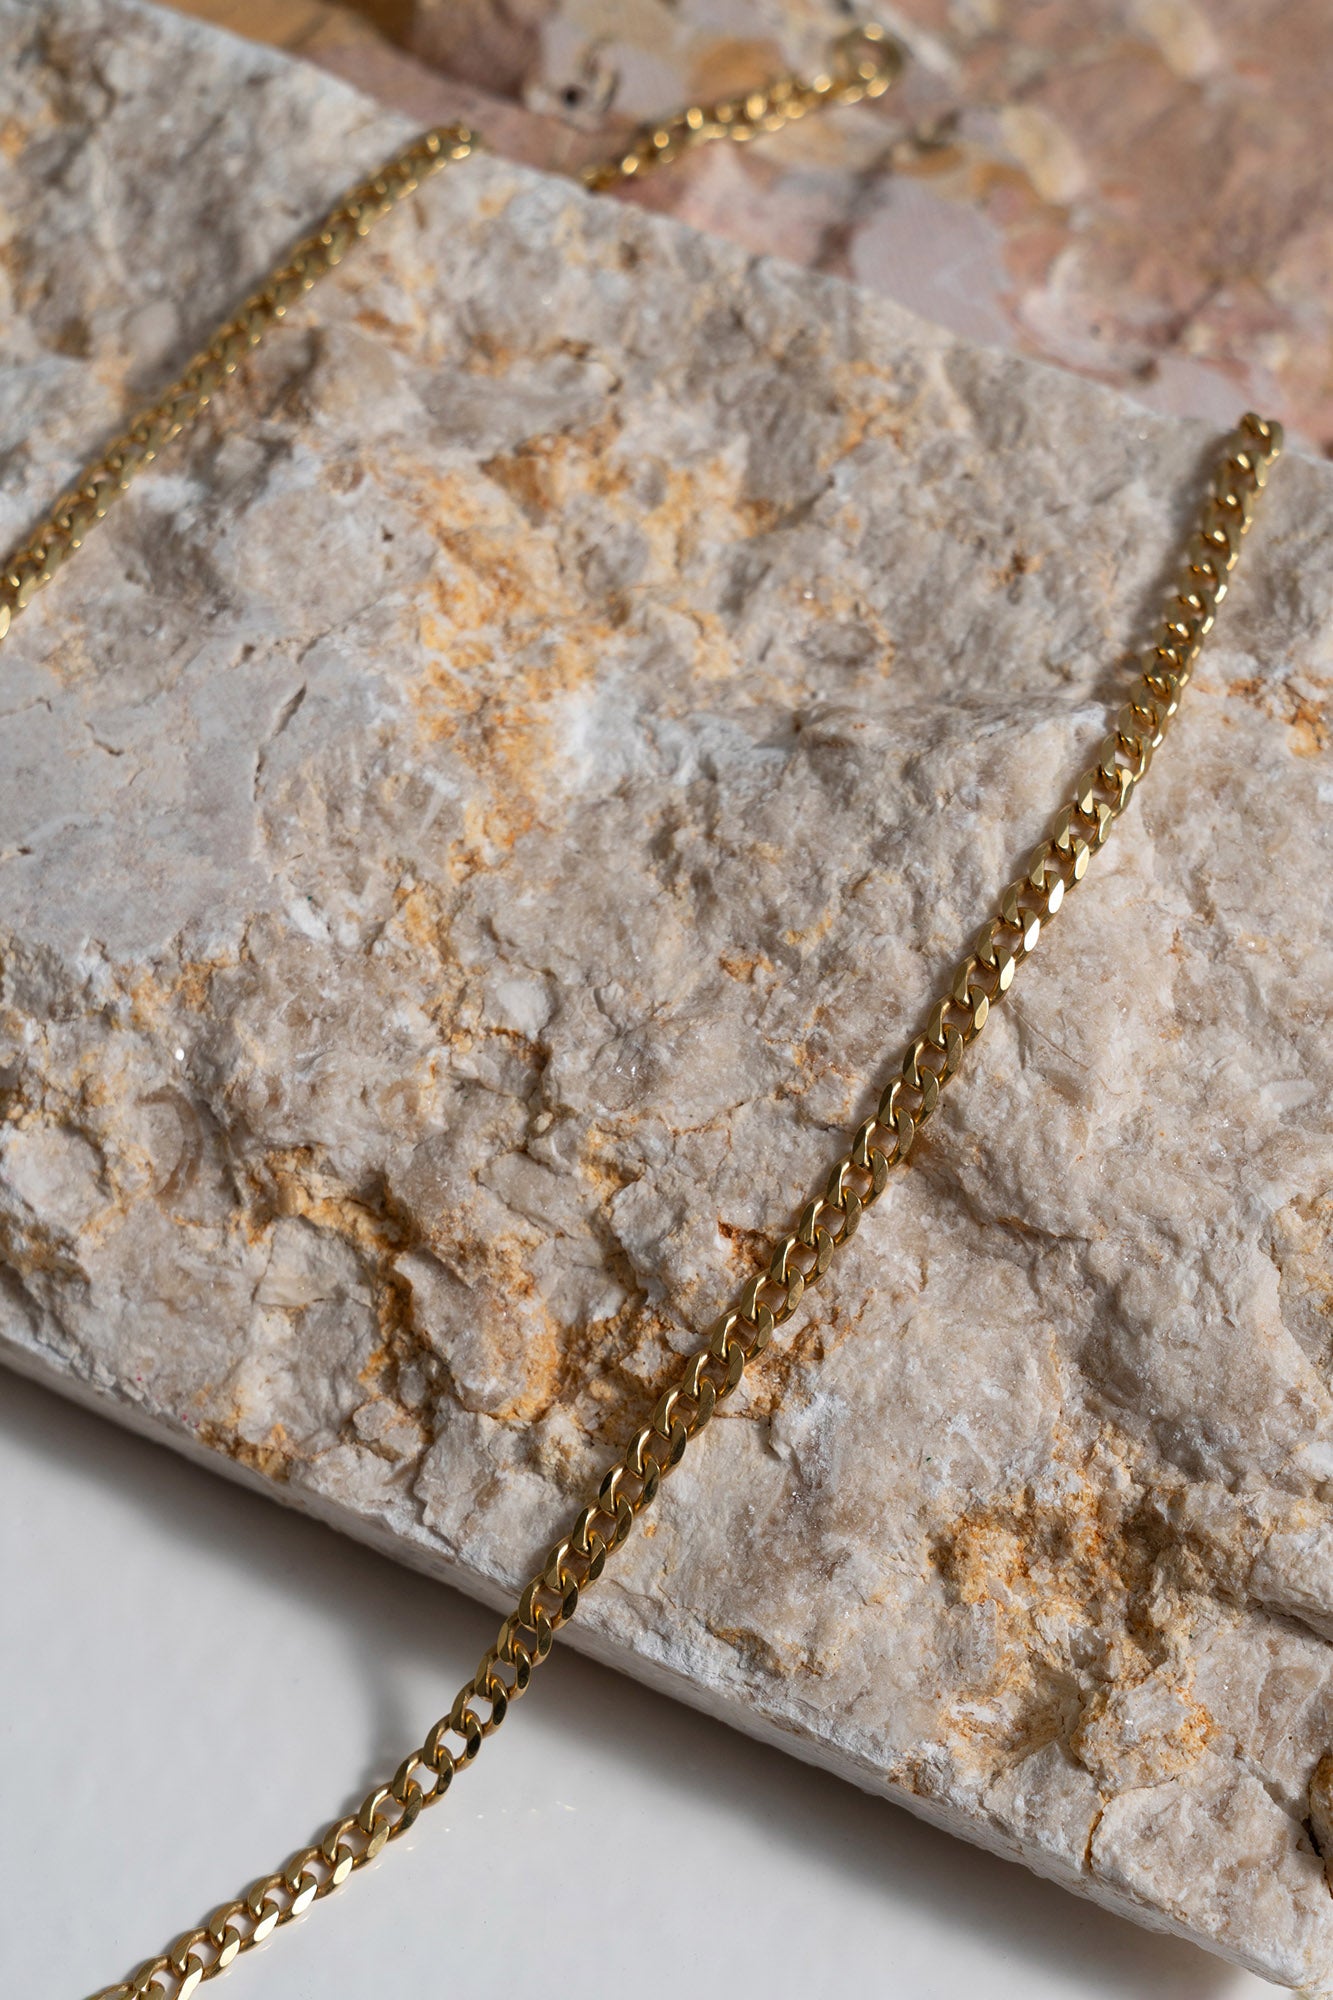 The Flat Chain Necklace